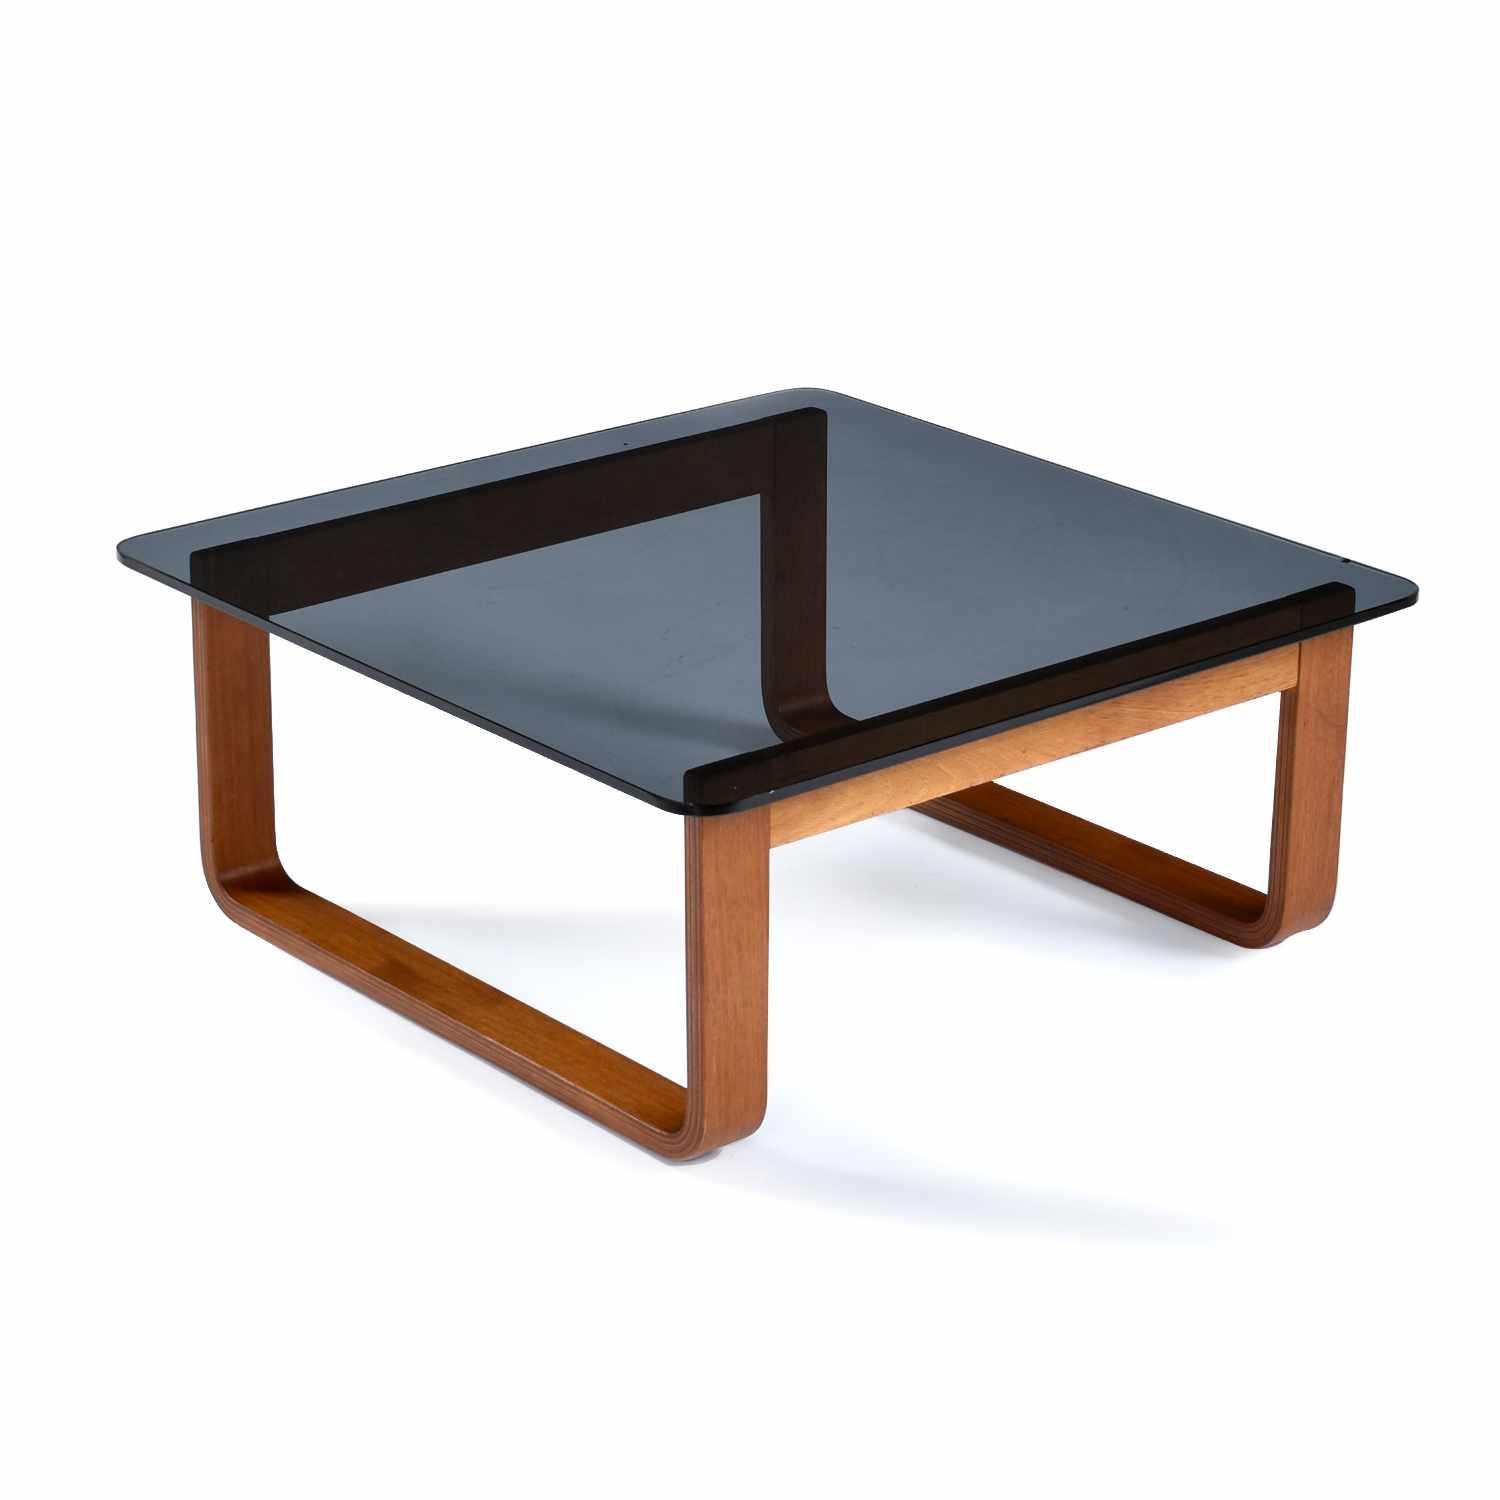 Minimalist Tessa T4 M square side table & rectangle coffee table set designed by Fred Lowen. The vintage 1970s side tables feature 3/8″ thick smoked glass top with rounded corners. The rounded corners are both elegant and easy on the shins. The